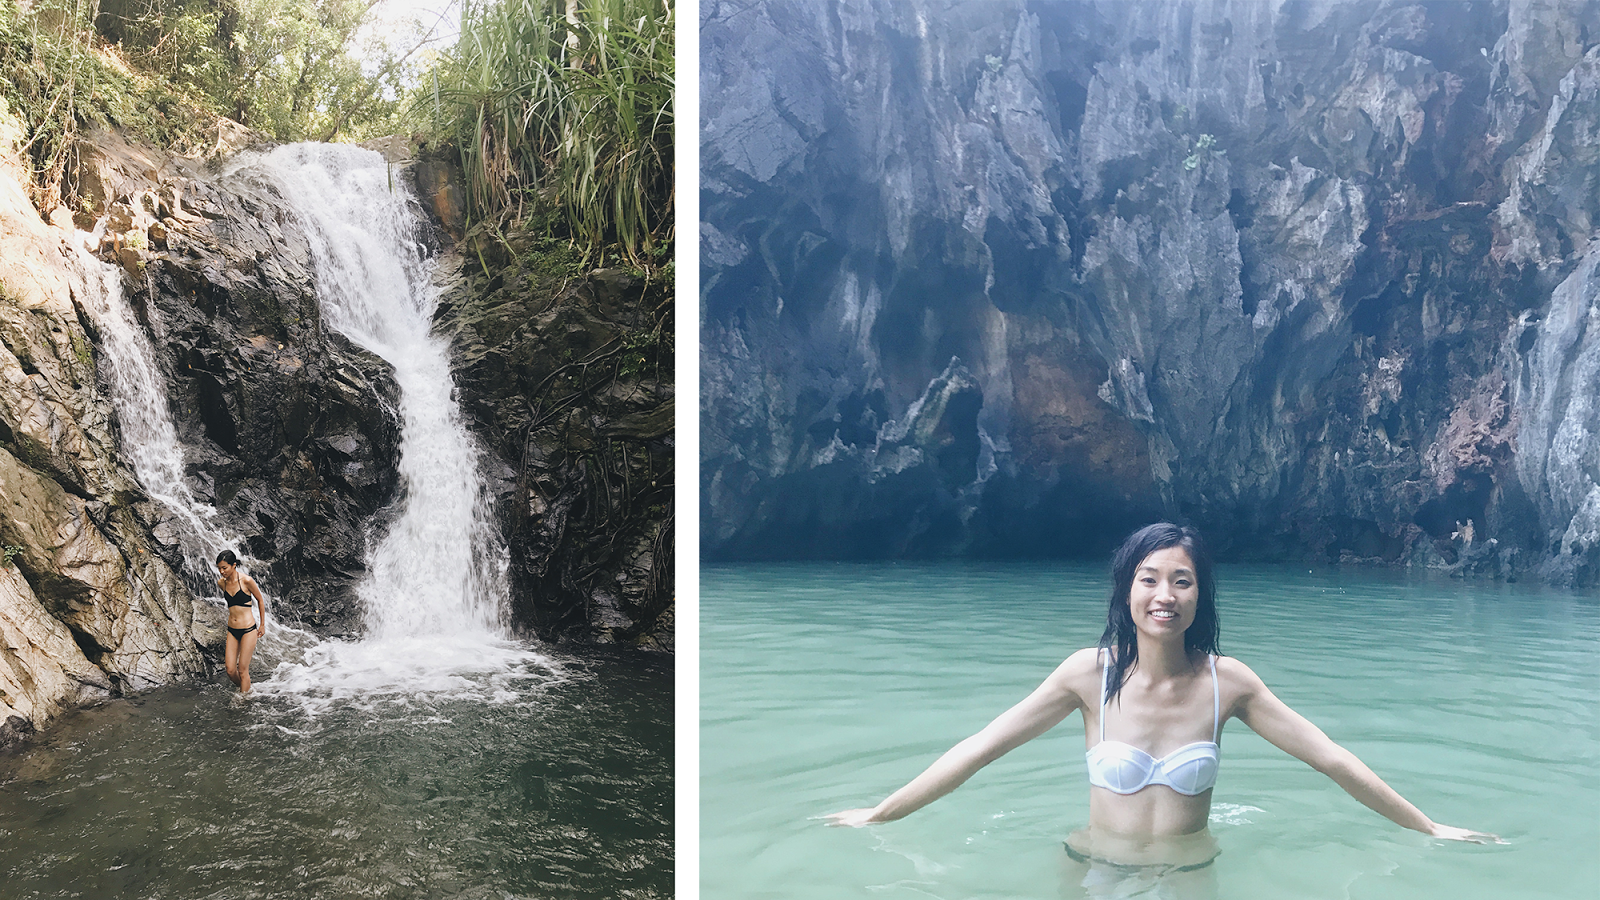 These waterfalls and lagoons were gorgeous, but I ended up with some cuts on my feet because I forgot to bring water shoes.